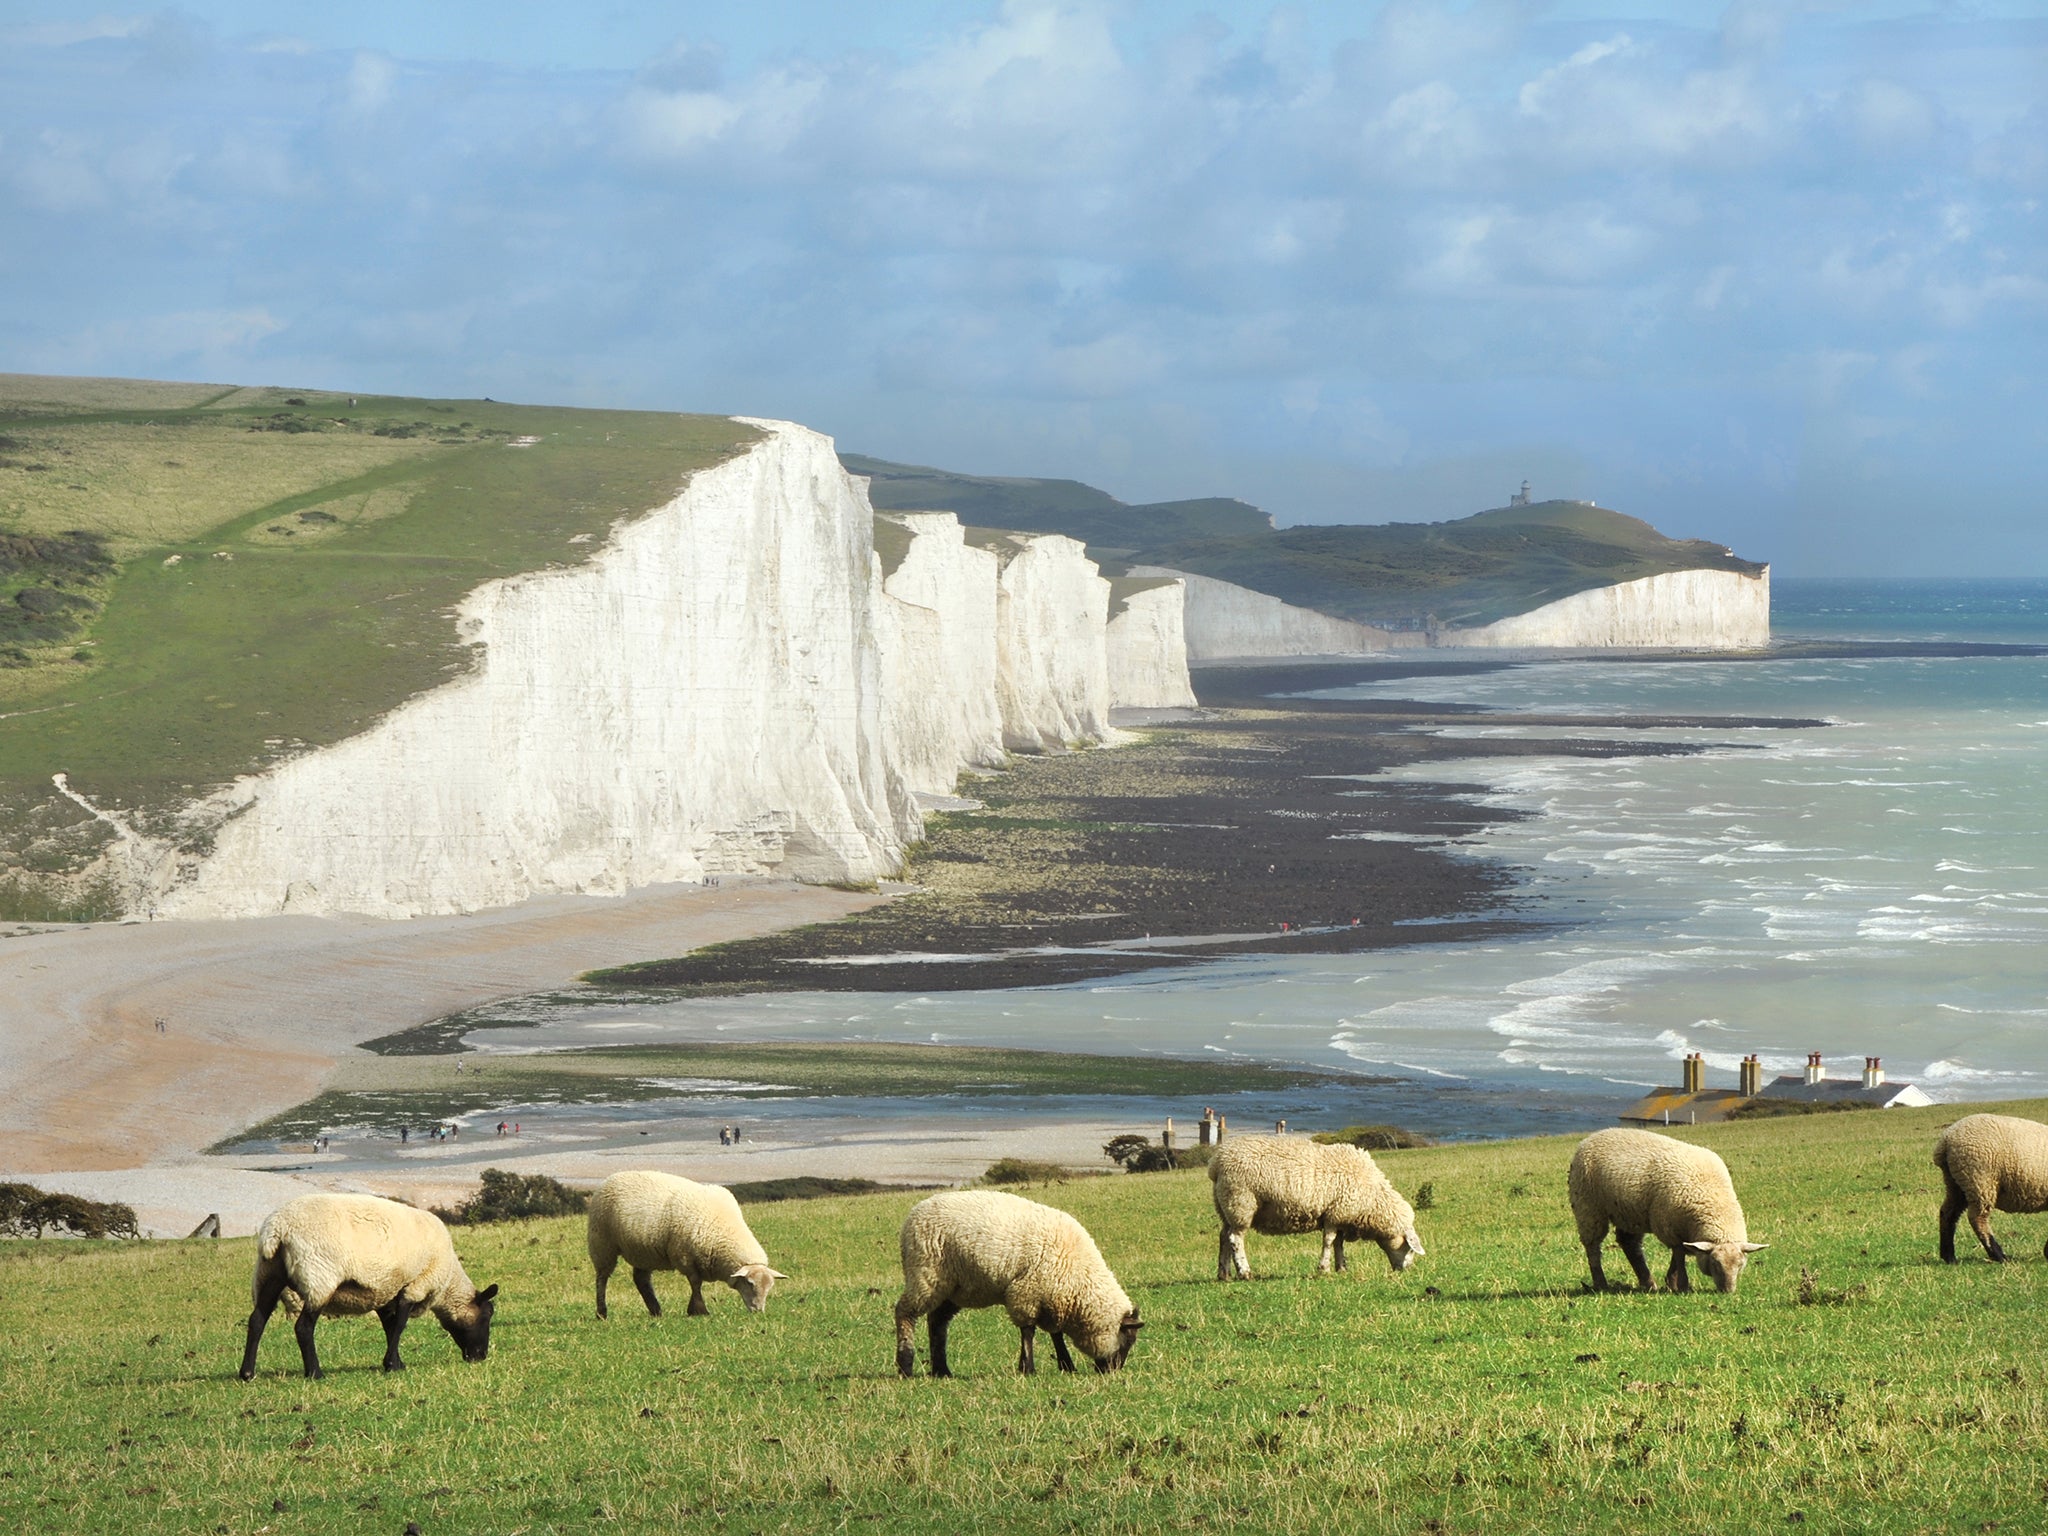 The Seven Sister cliffs on the South Downs overlooking the English Channel (Getty)